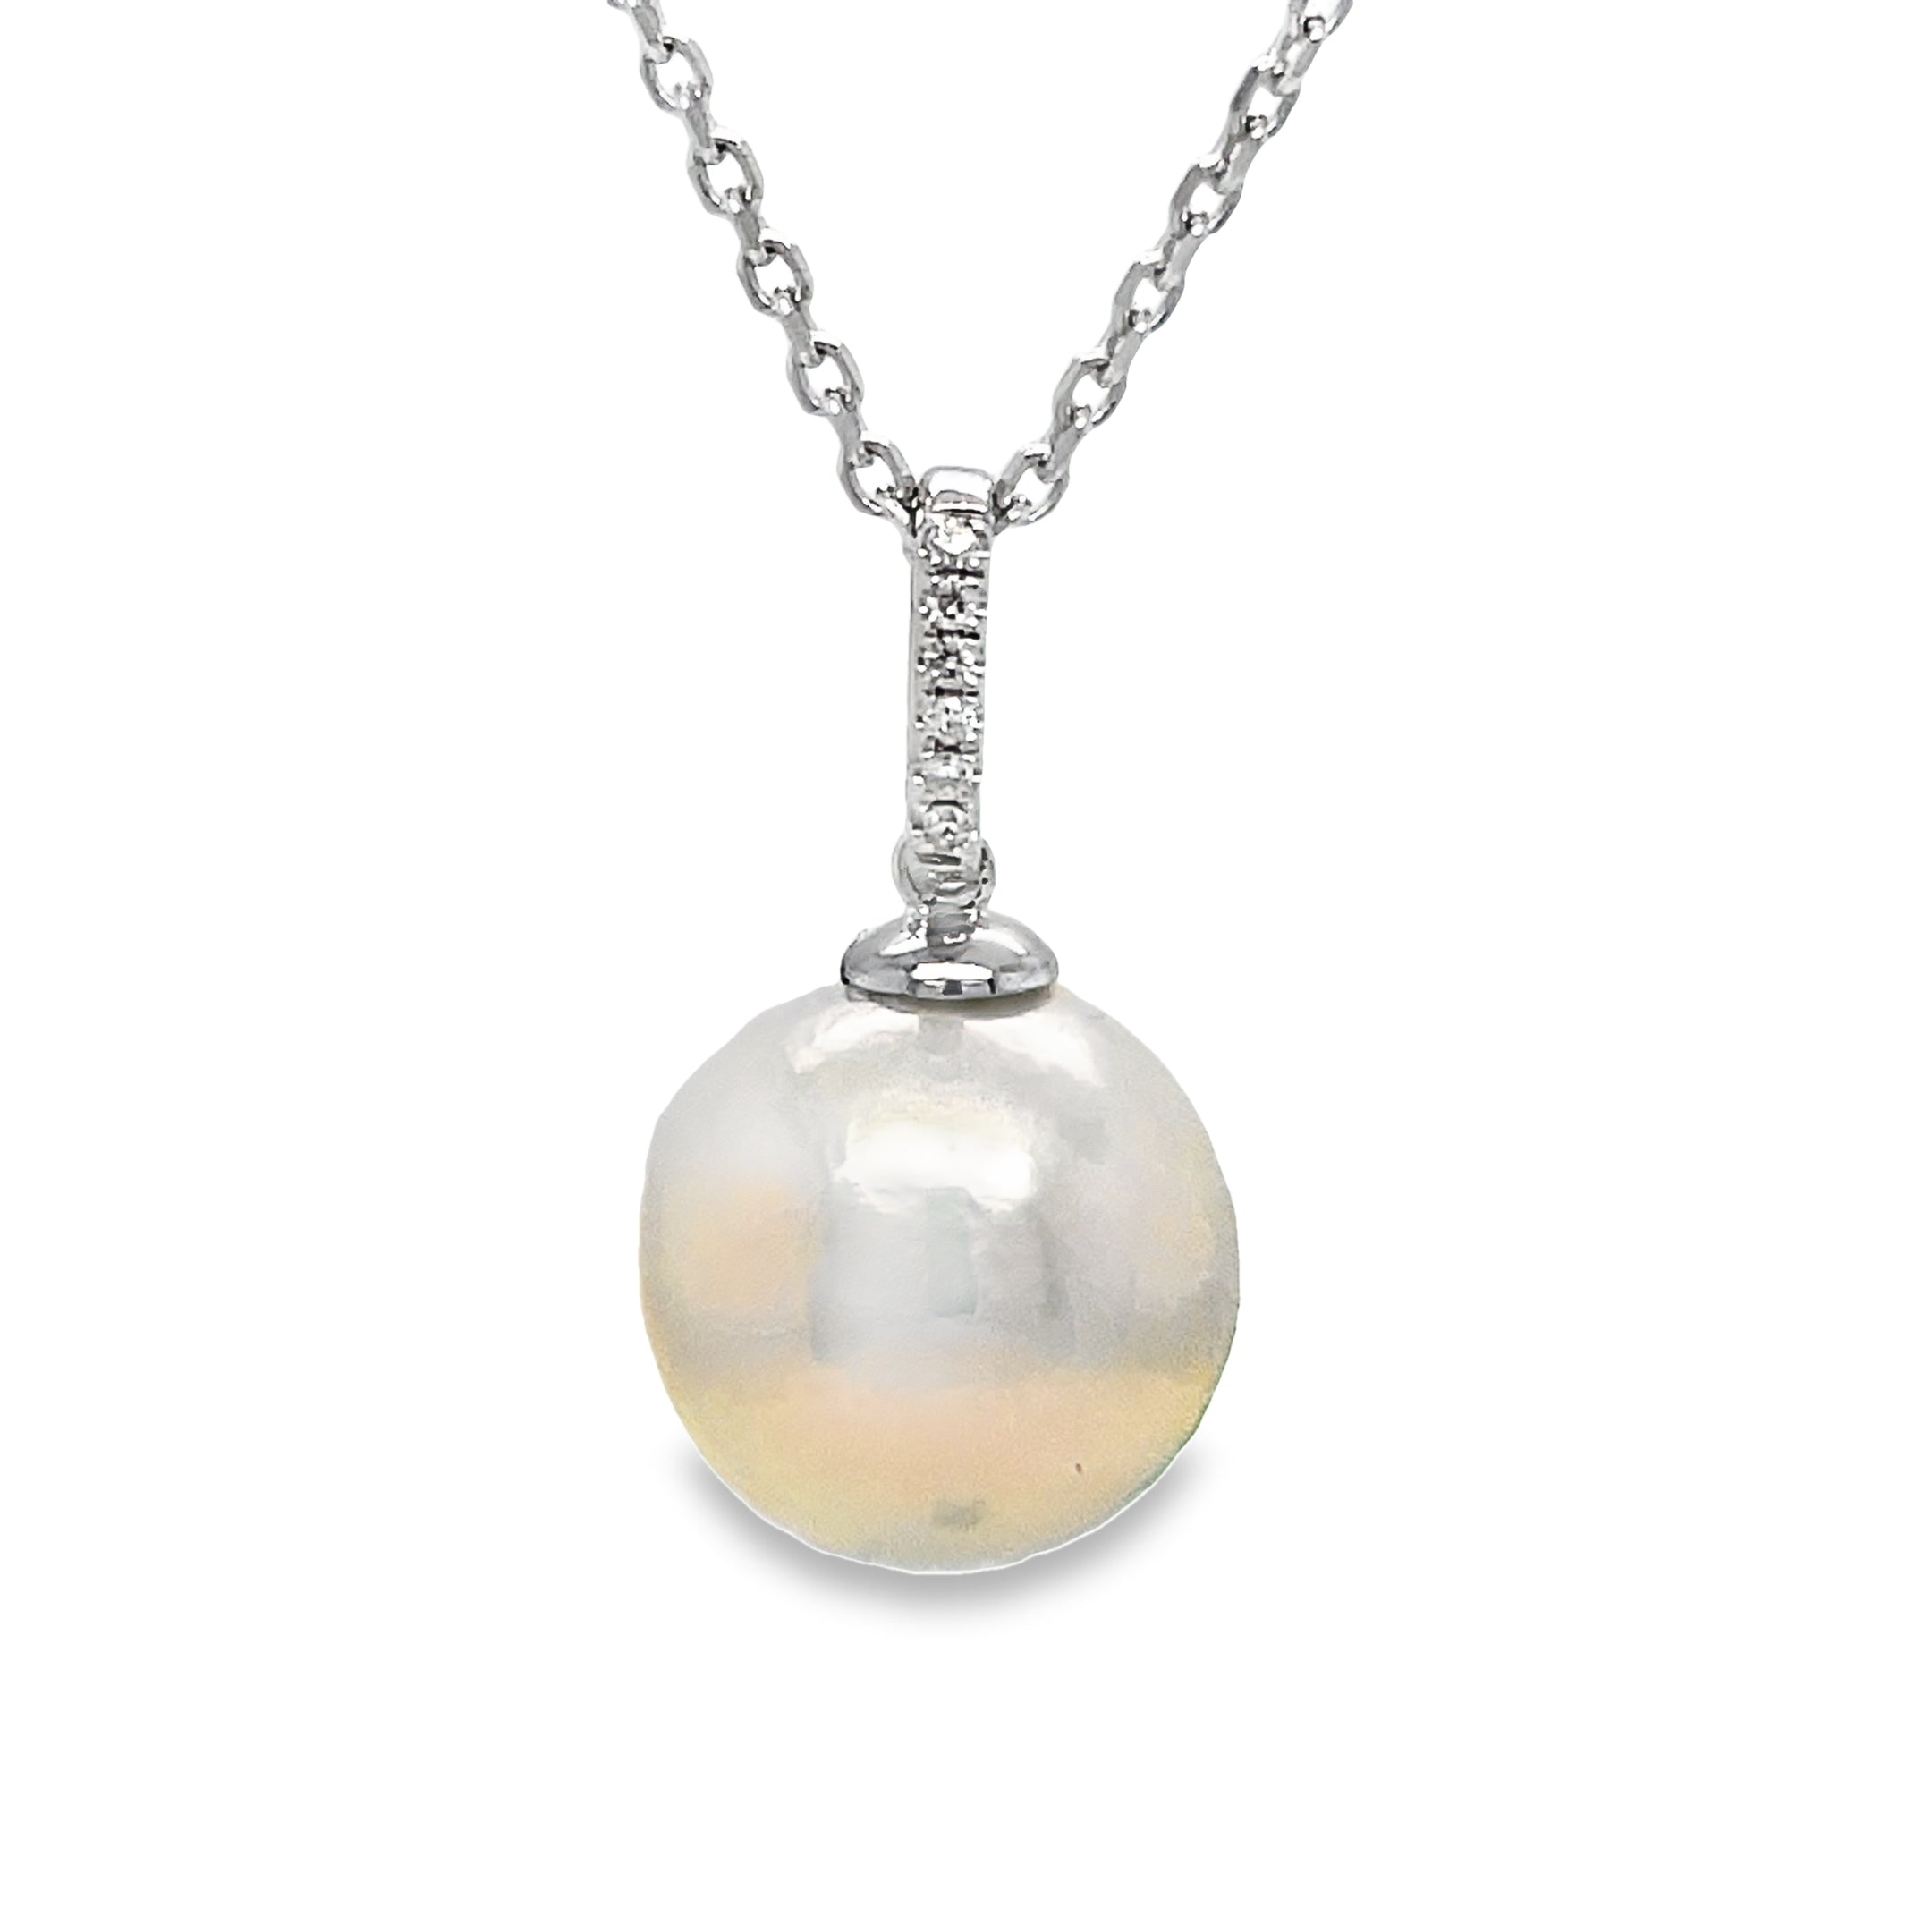 This 14k white gold necklace features a stunning South Sea pearl with great luster and color measuring 12.00 mm. The pearl is accented by a five stone diamond pendant and comes accompanied by an 18" white gold chain. Elevate any look with this elegant and timeless piece.